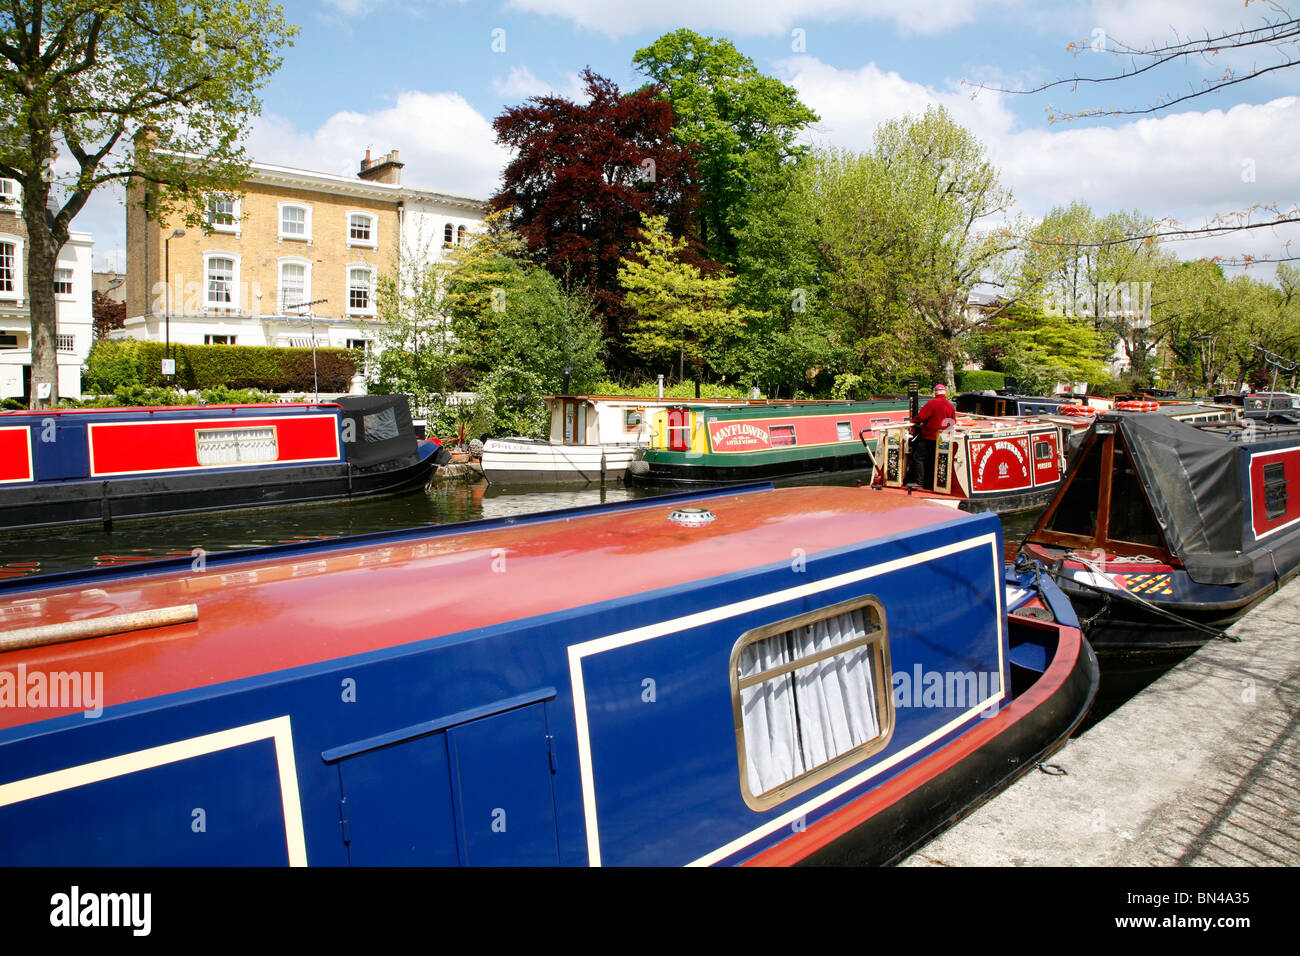 Boats moored on the Regent's Canal by Blomfield Road, Maida Vale, London, UK Stock Photo